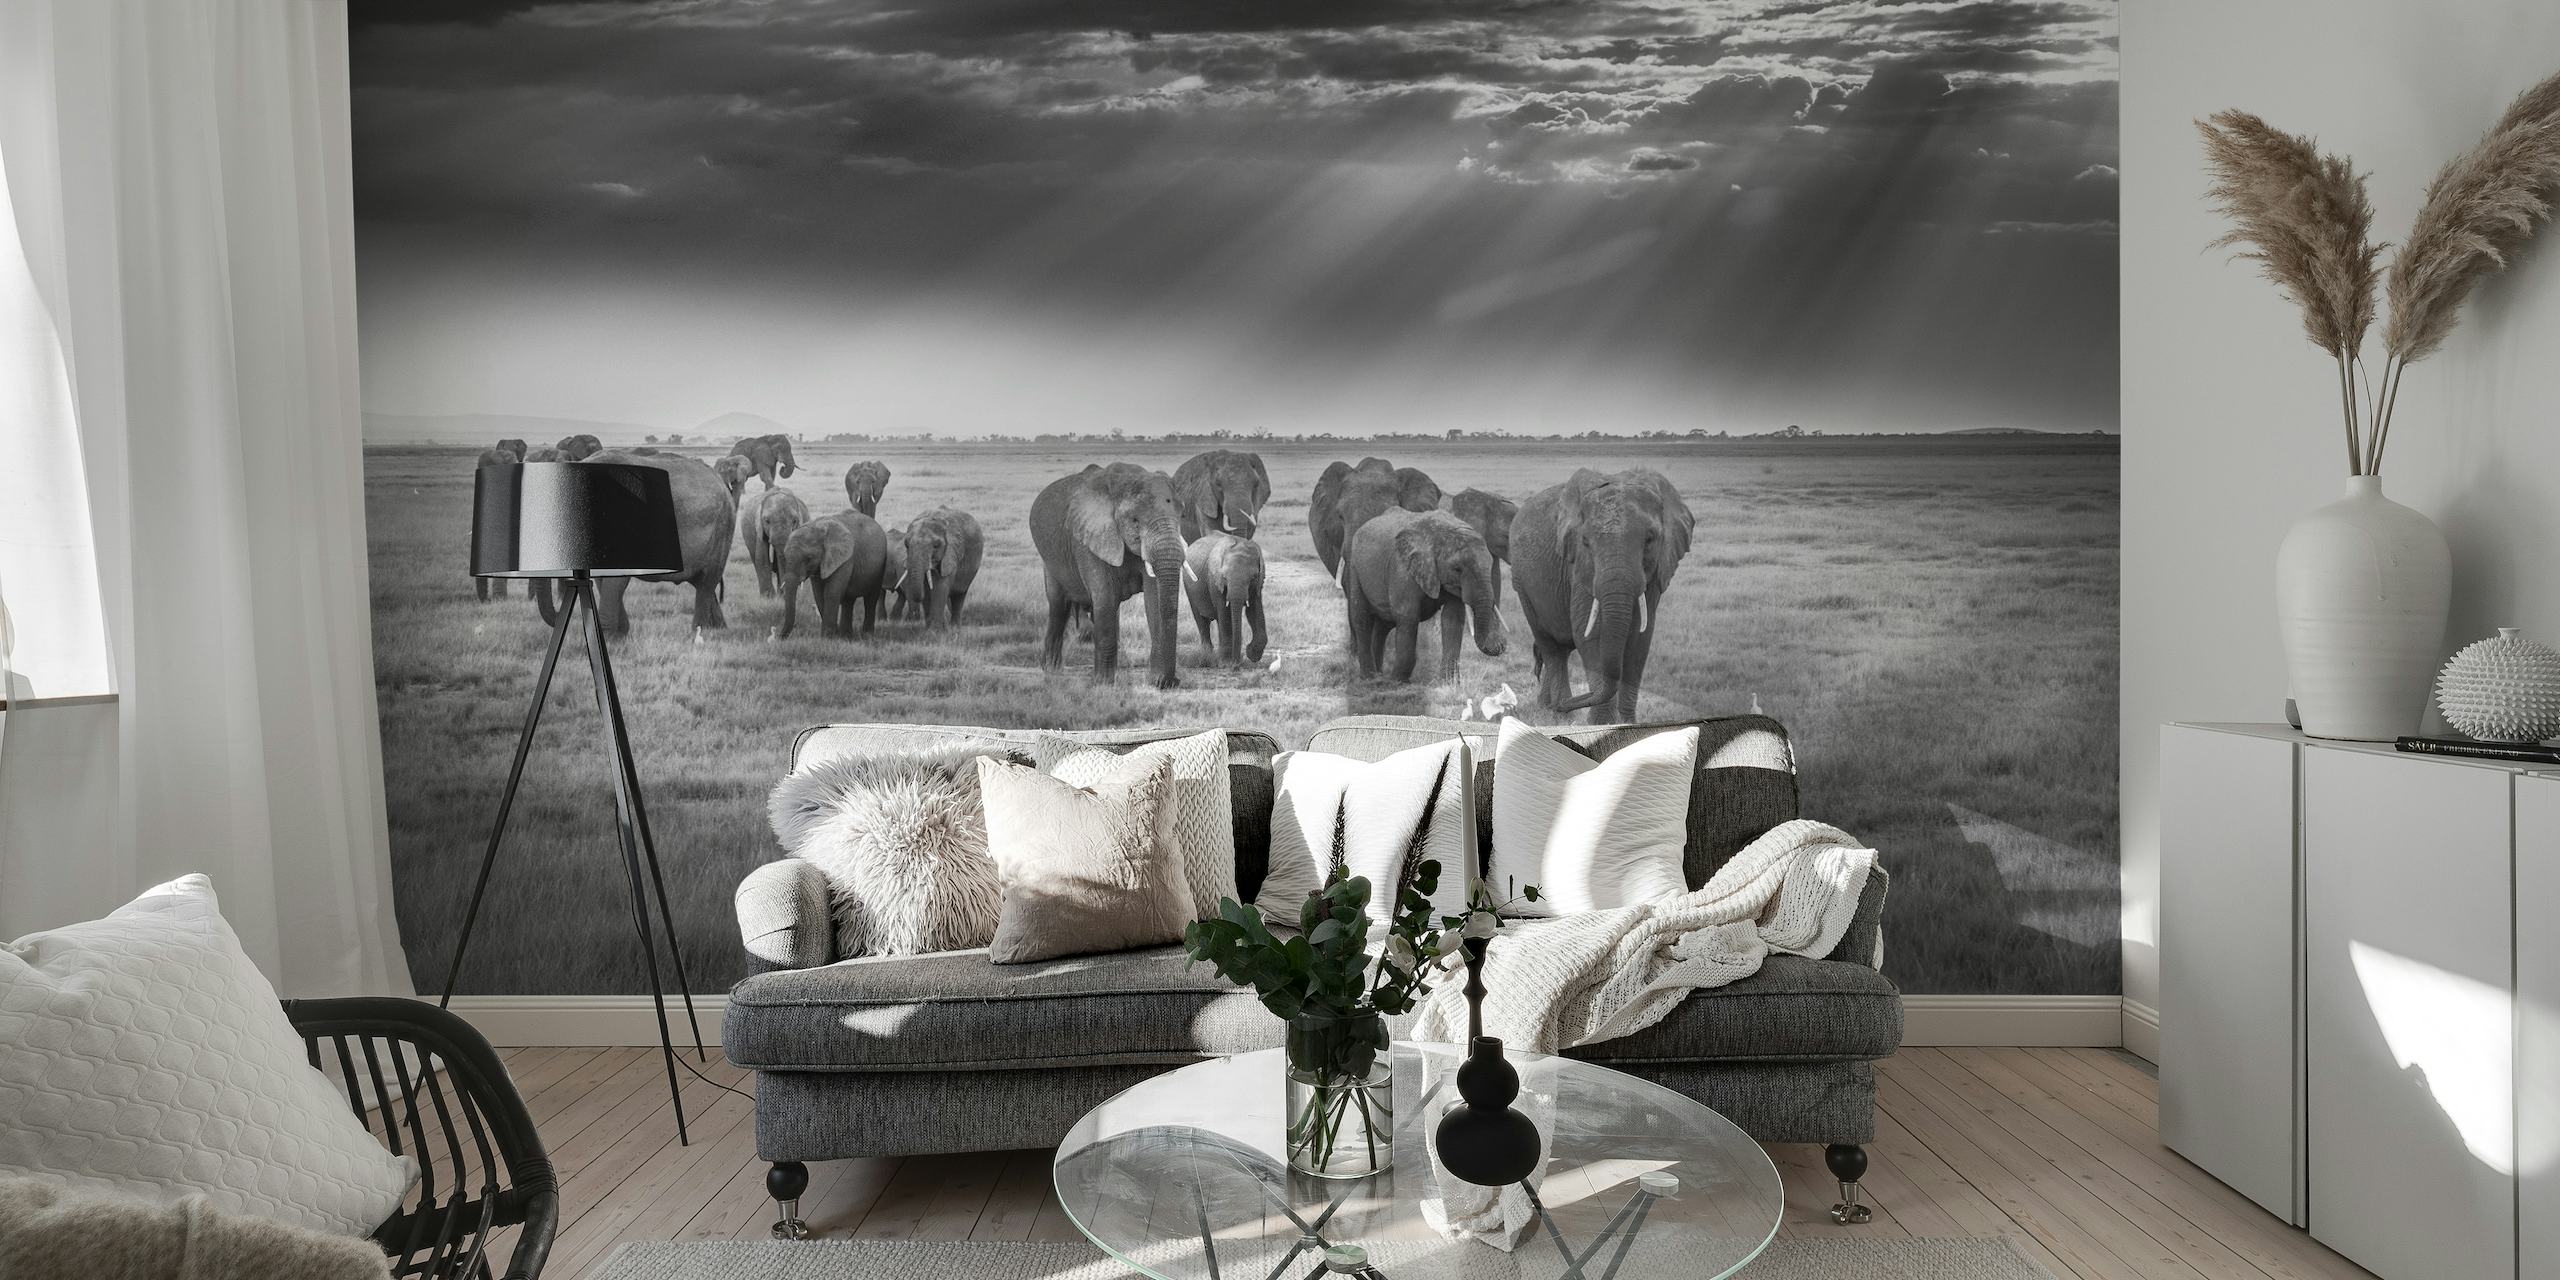 Breakfast with pachyderms wallpaper